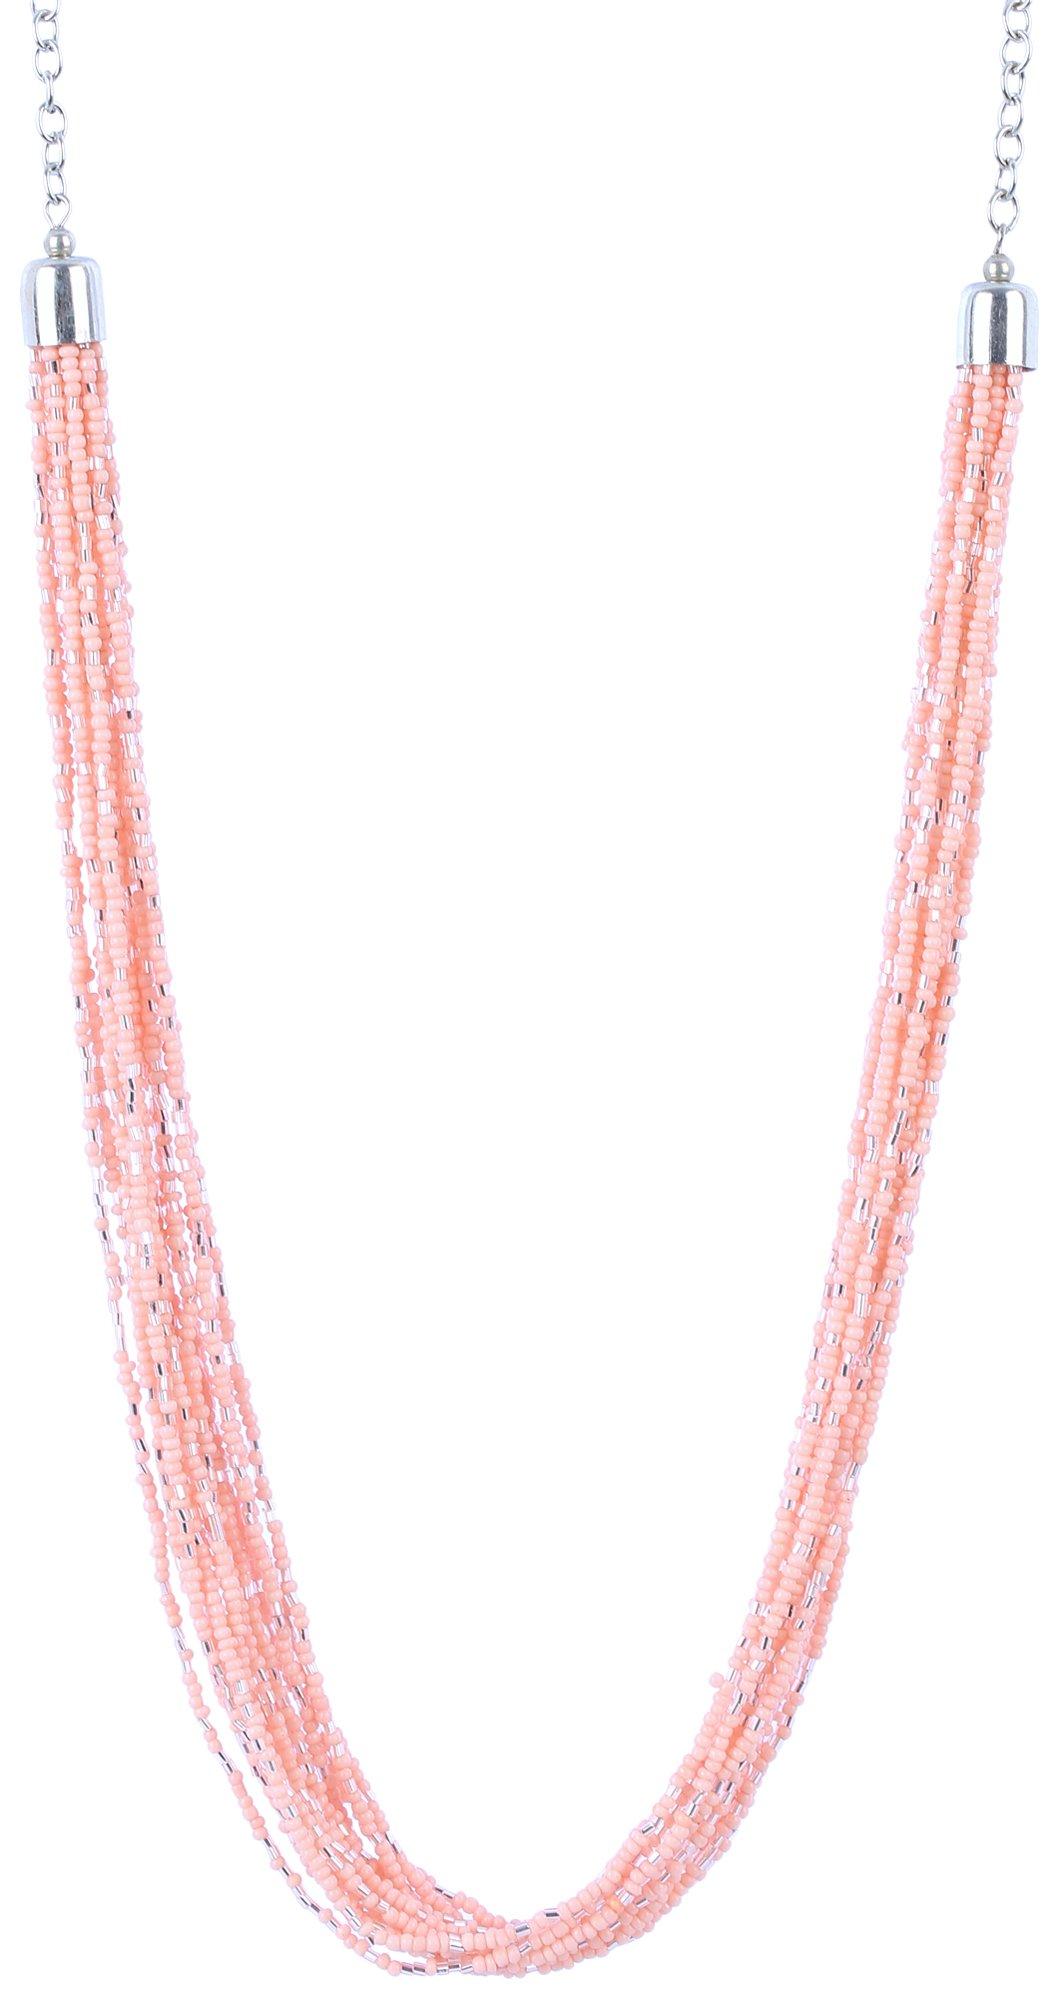 34 In. Multi-Row Seed Bead Frontal Necklace